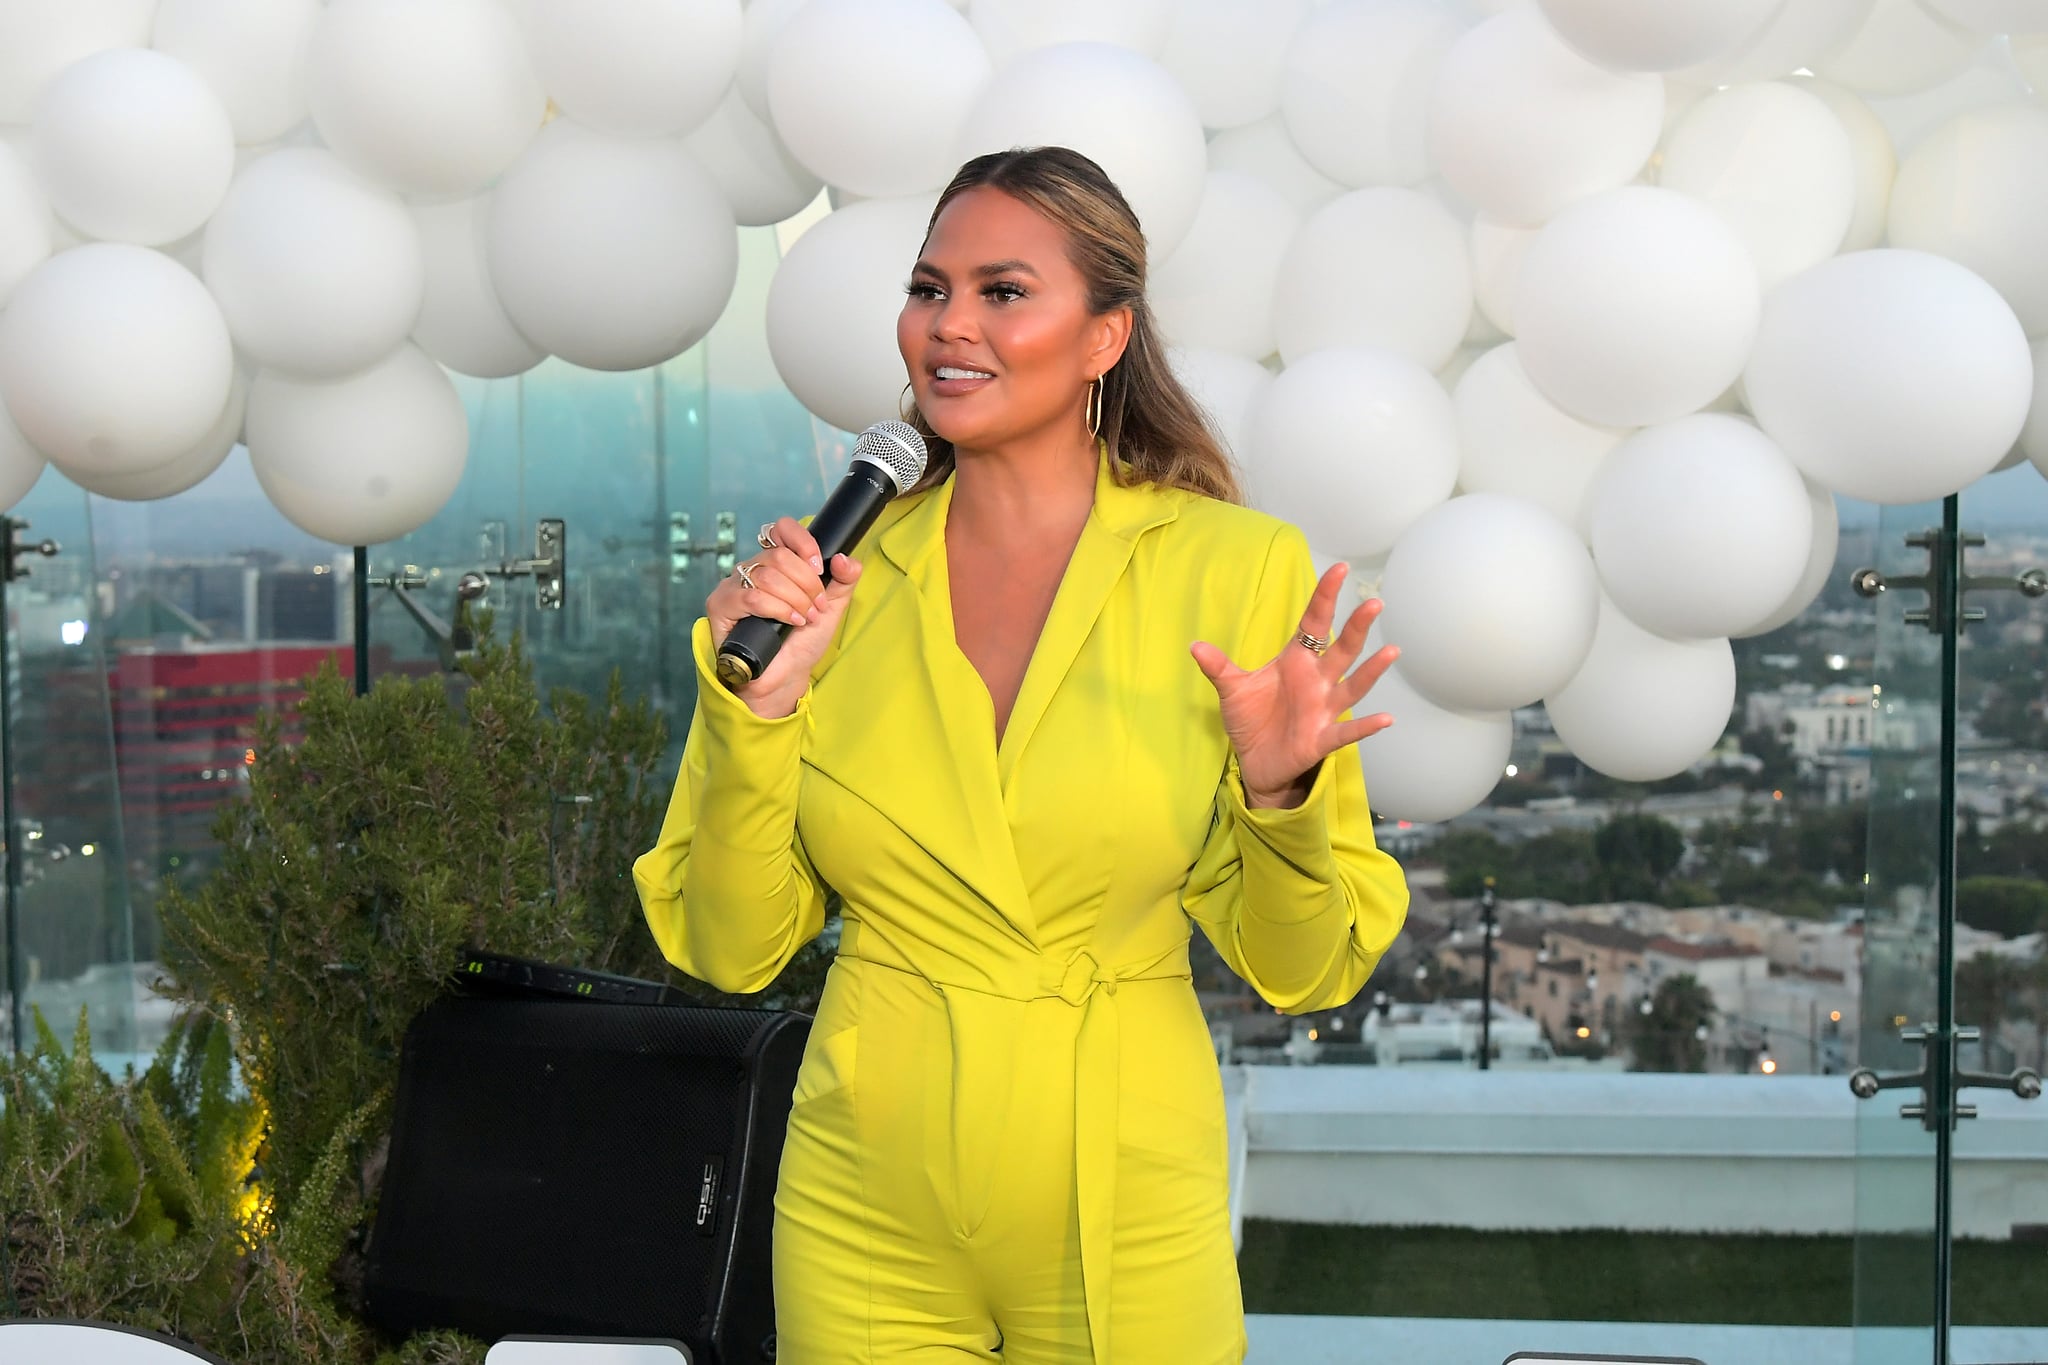 WEST HOLLYWOOD, CALIFORNIA - AUGUST 15: Chrissy Teigen speaks during the Quay x Chrissy Teigen launch event at The London West Hollywood on August 15, 2019 in West Hollywood, California. (Photo by Charley Gallay/Getty Images for Quay Australia)